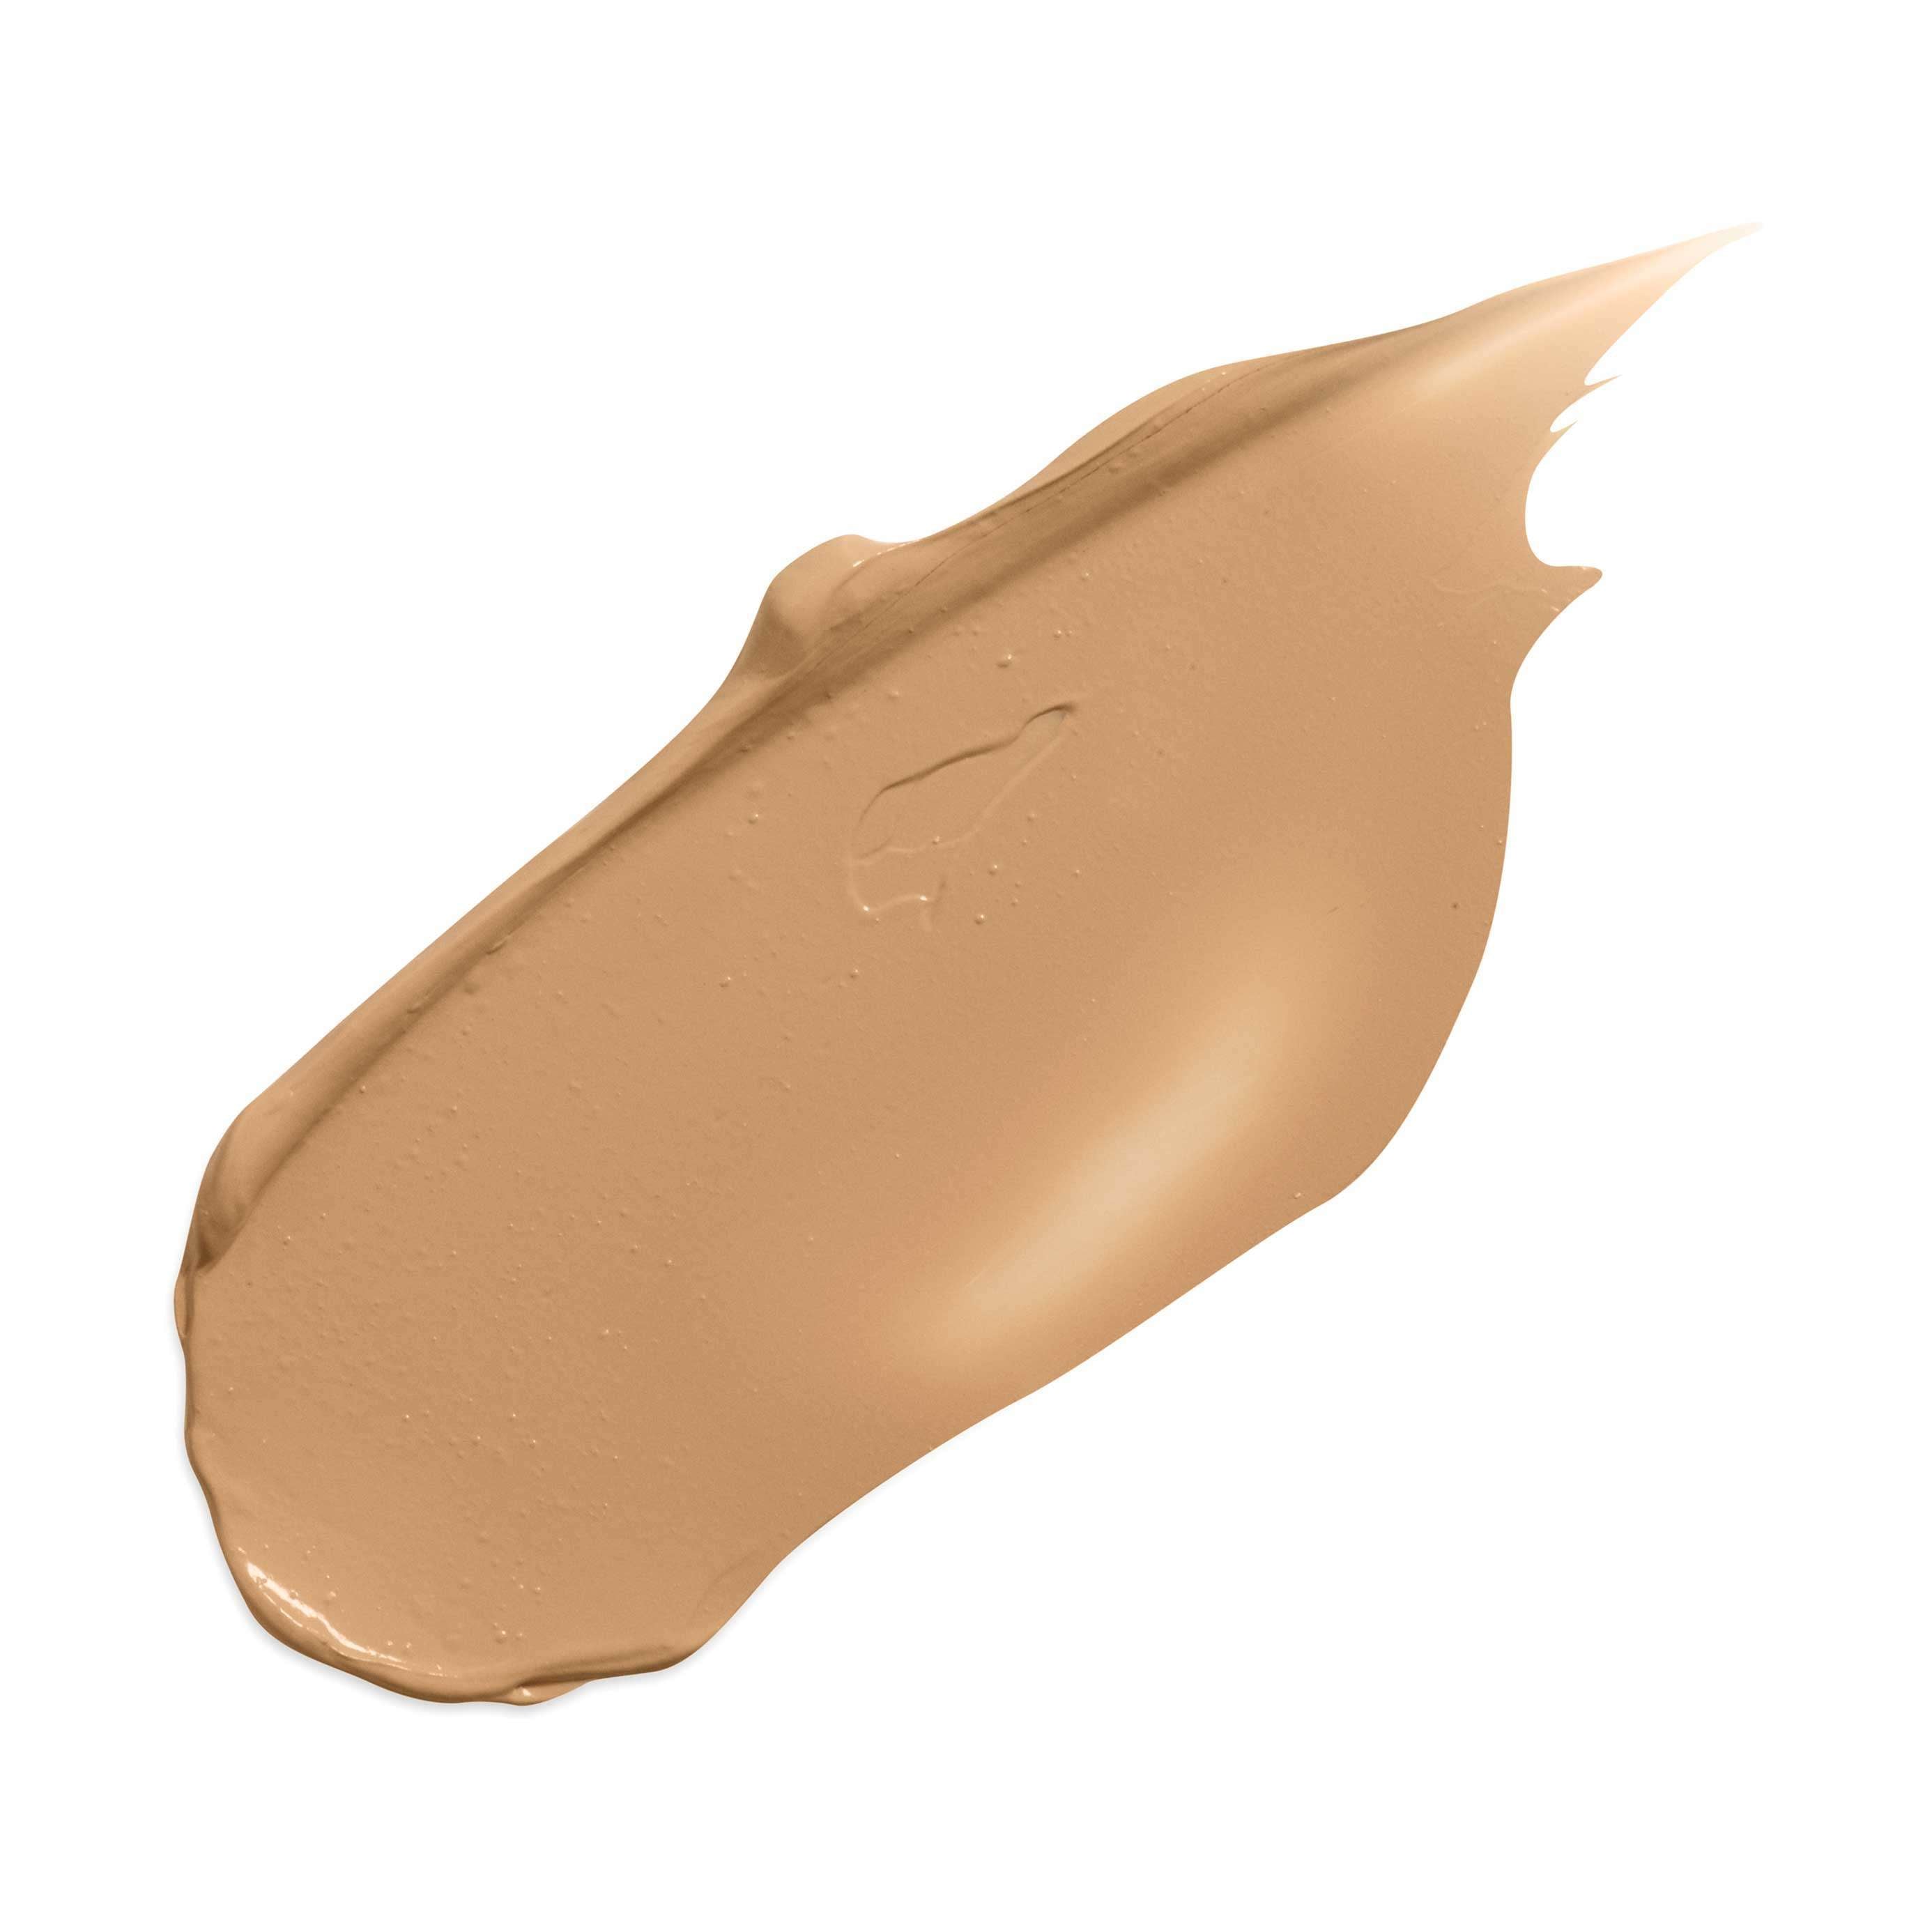 Jane Iredale Disappear™ Full Coverage Concealer, Medium Dark Disappear